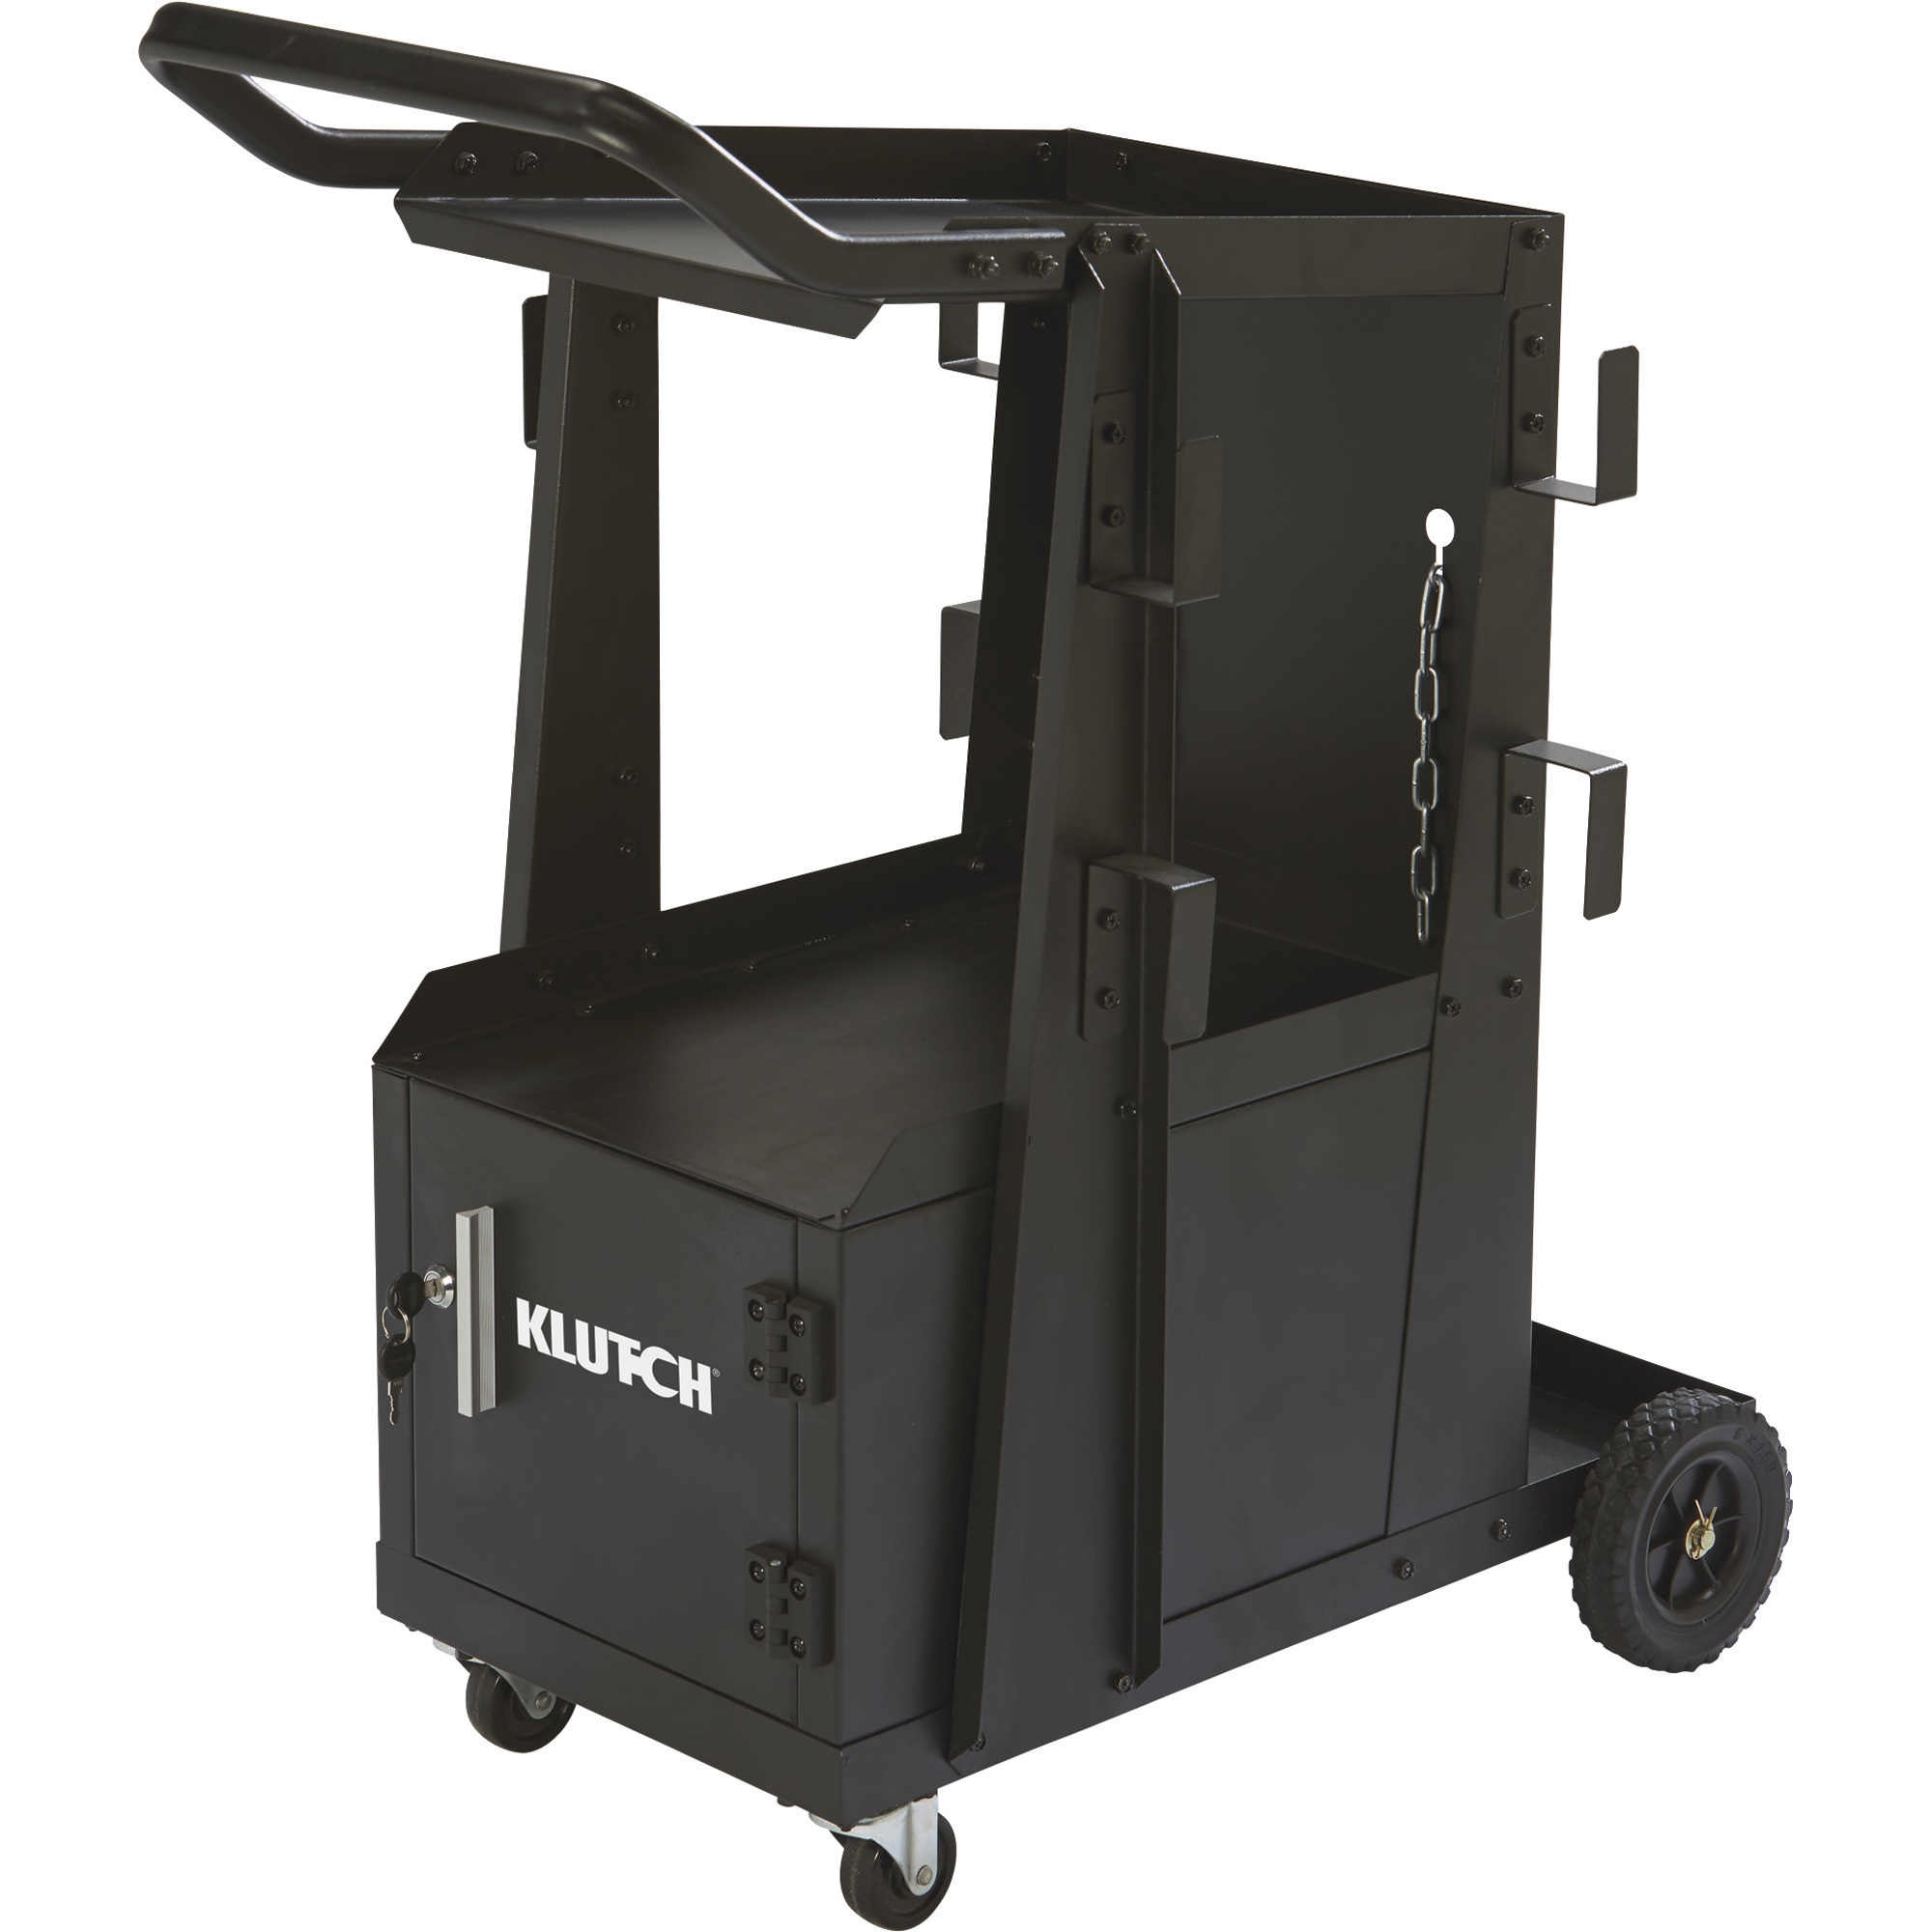 Please see replacement item# 106980. Klutch 2-Tier Welding Cart with Locking Cabinet â 27 1/4Inch L x 18 3/4Inch W x 35 3/4Inch H